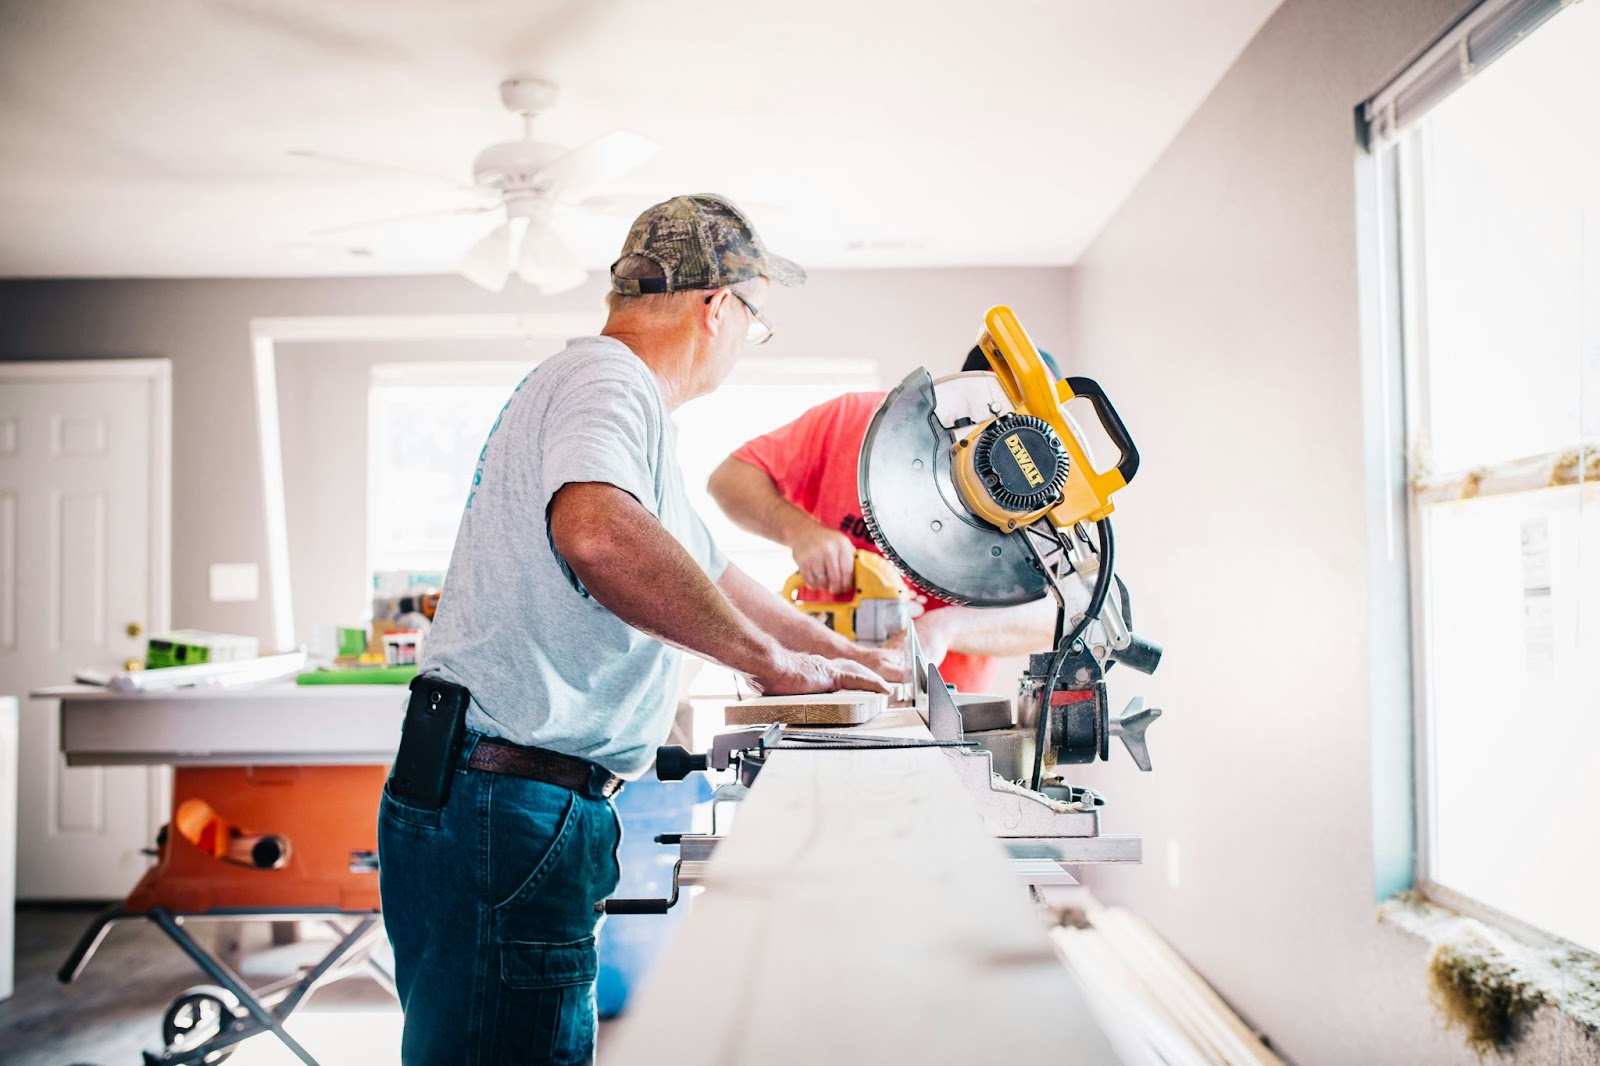 5 Red Flags To Watch Out For During a Home Renovation